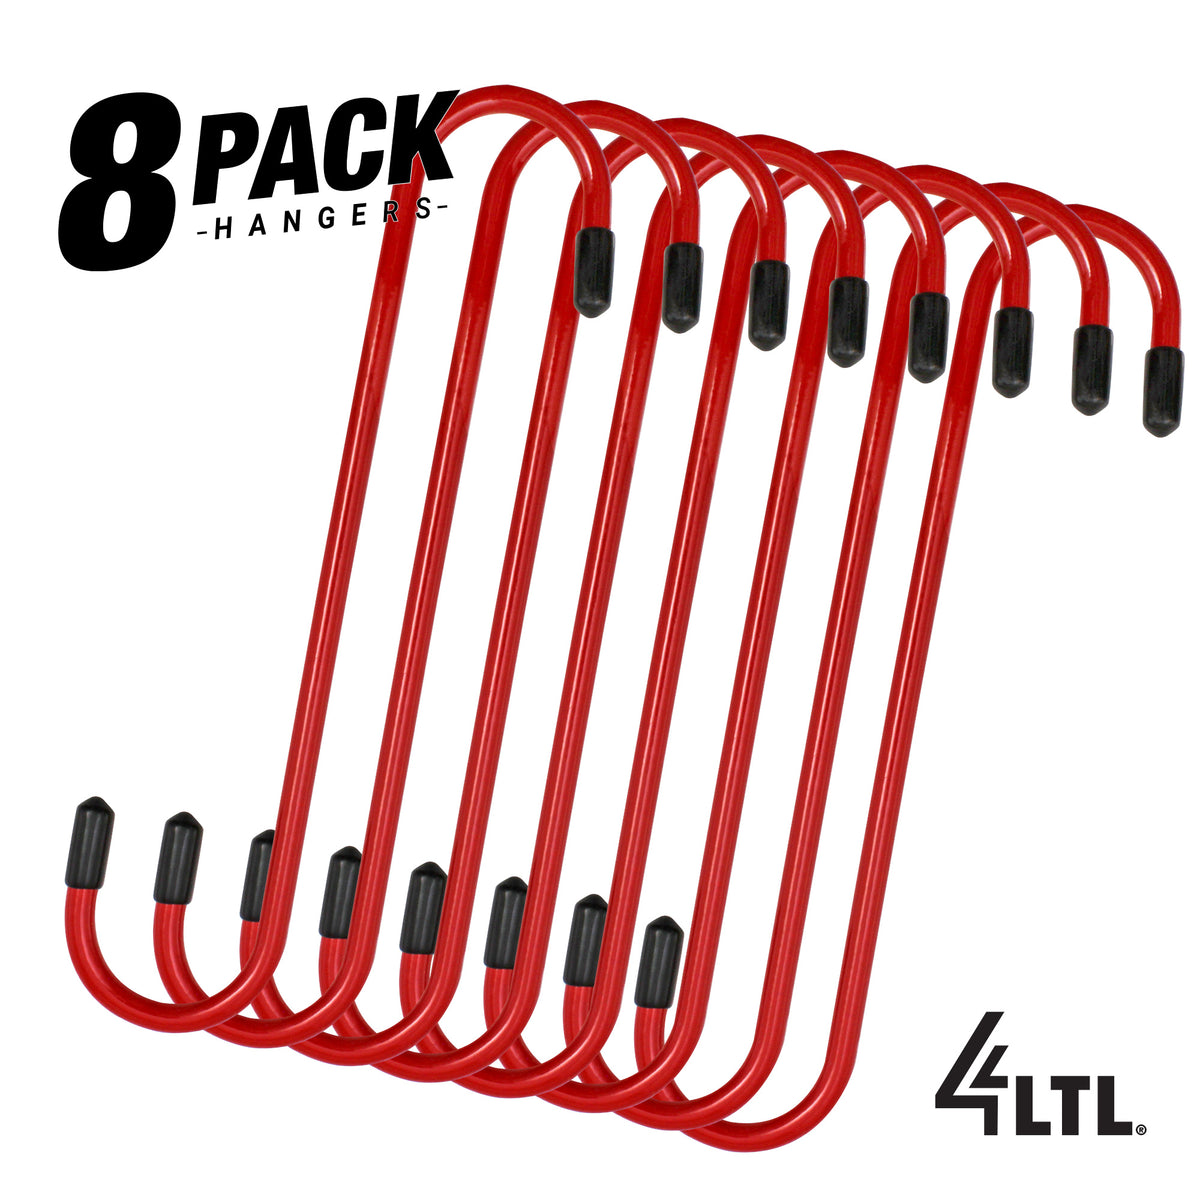 The Hangers (8-Pack)